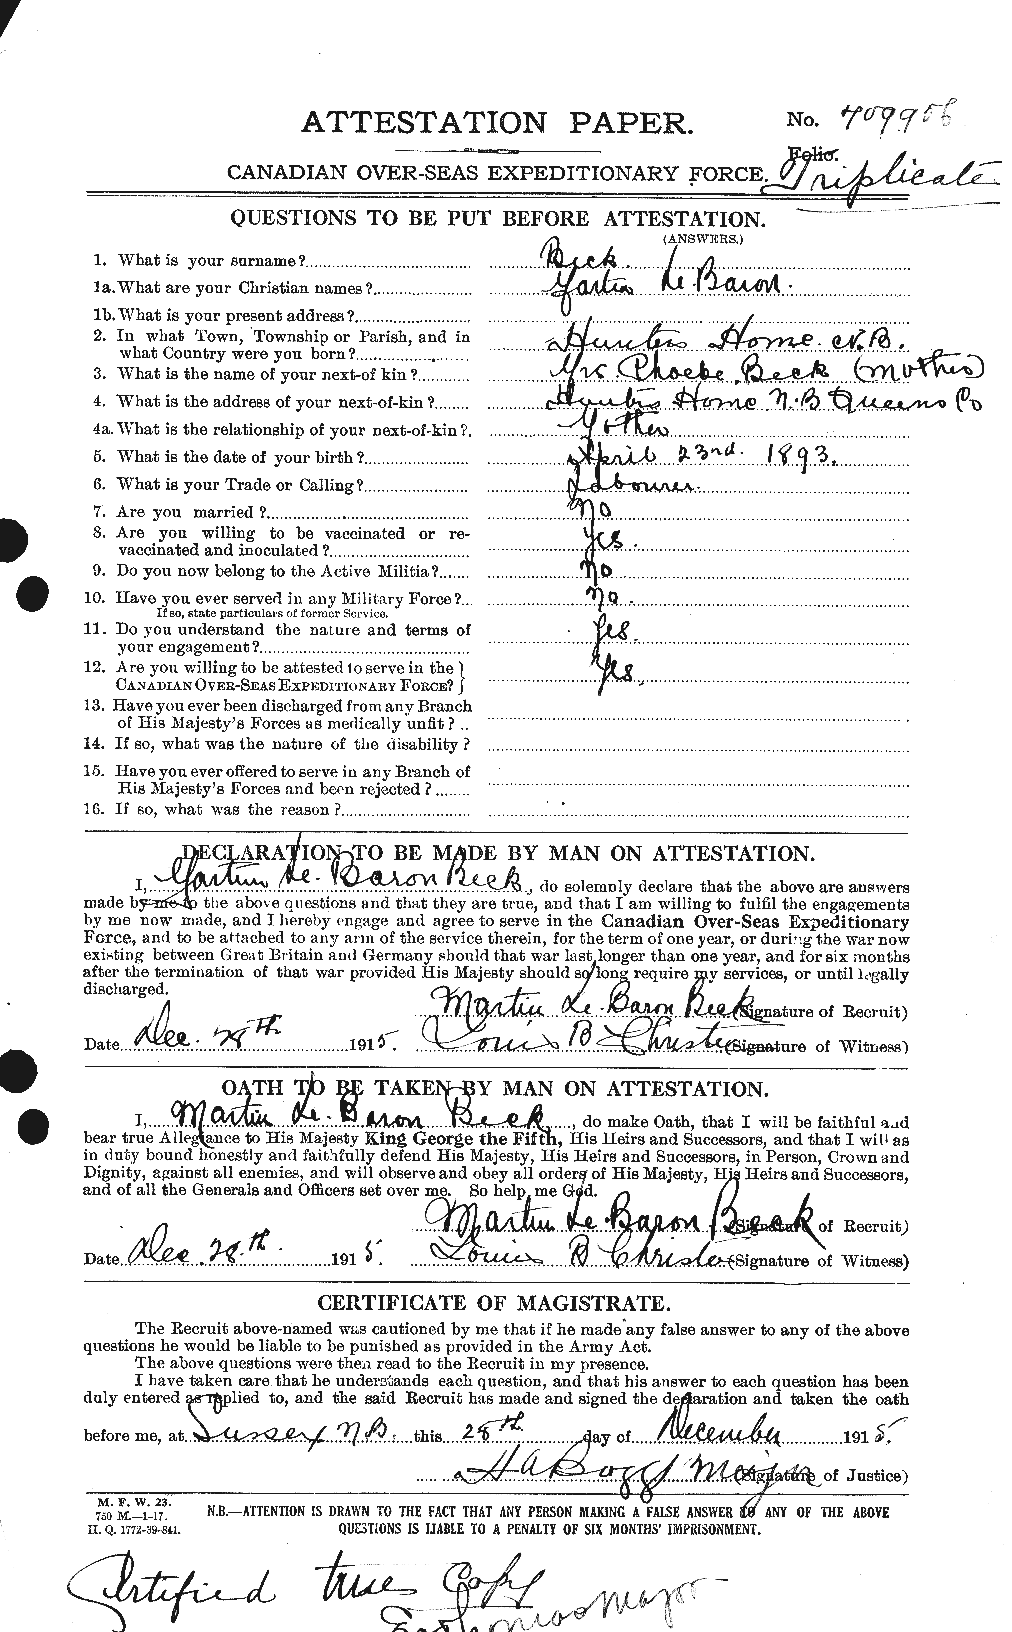 Personnel Records of the First World War - CEF 232198a